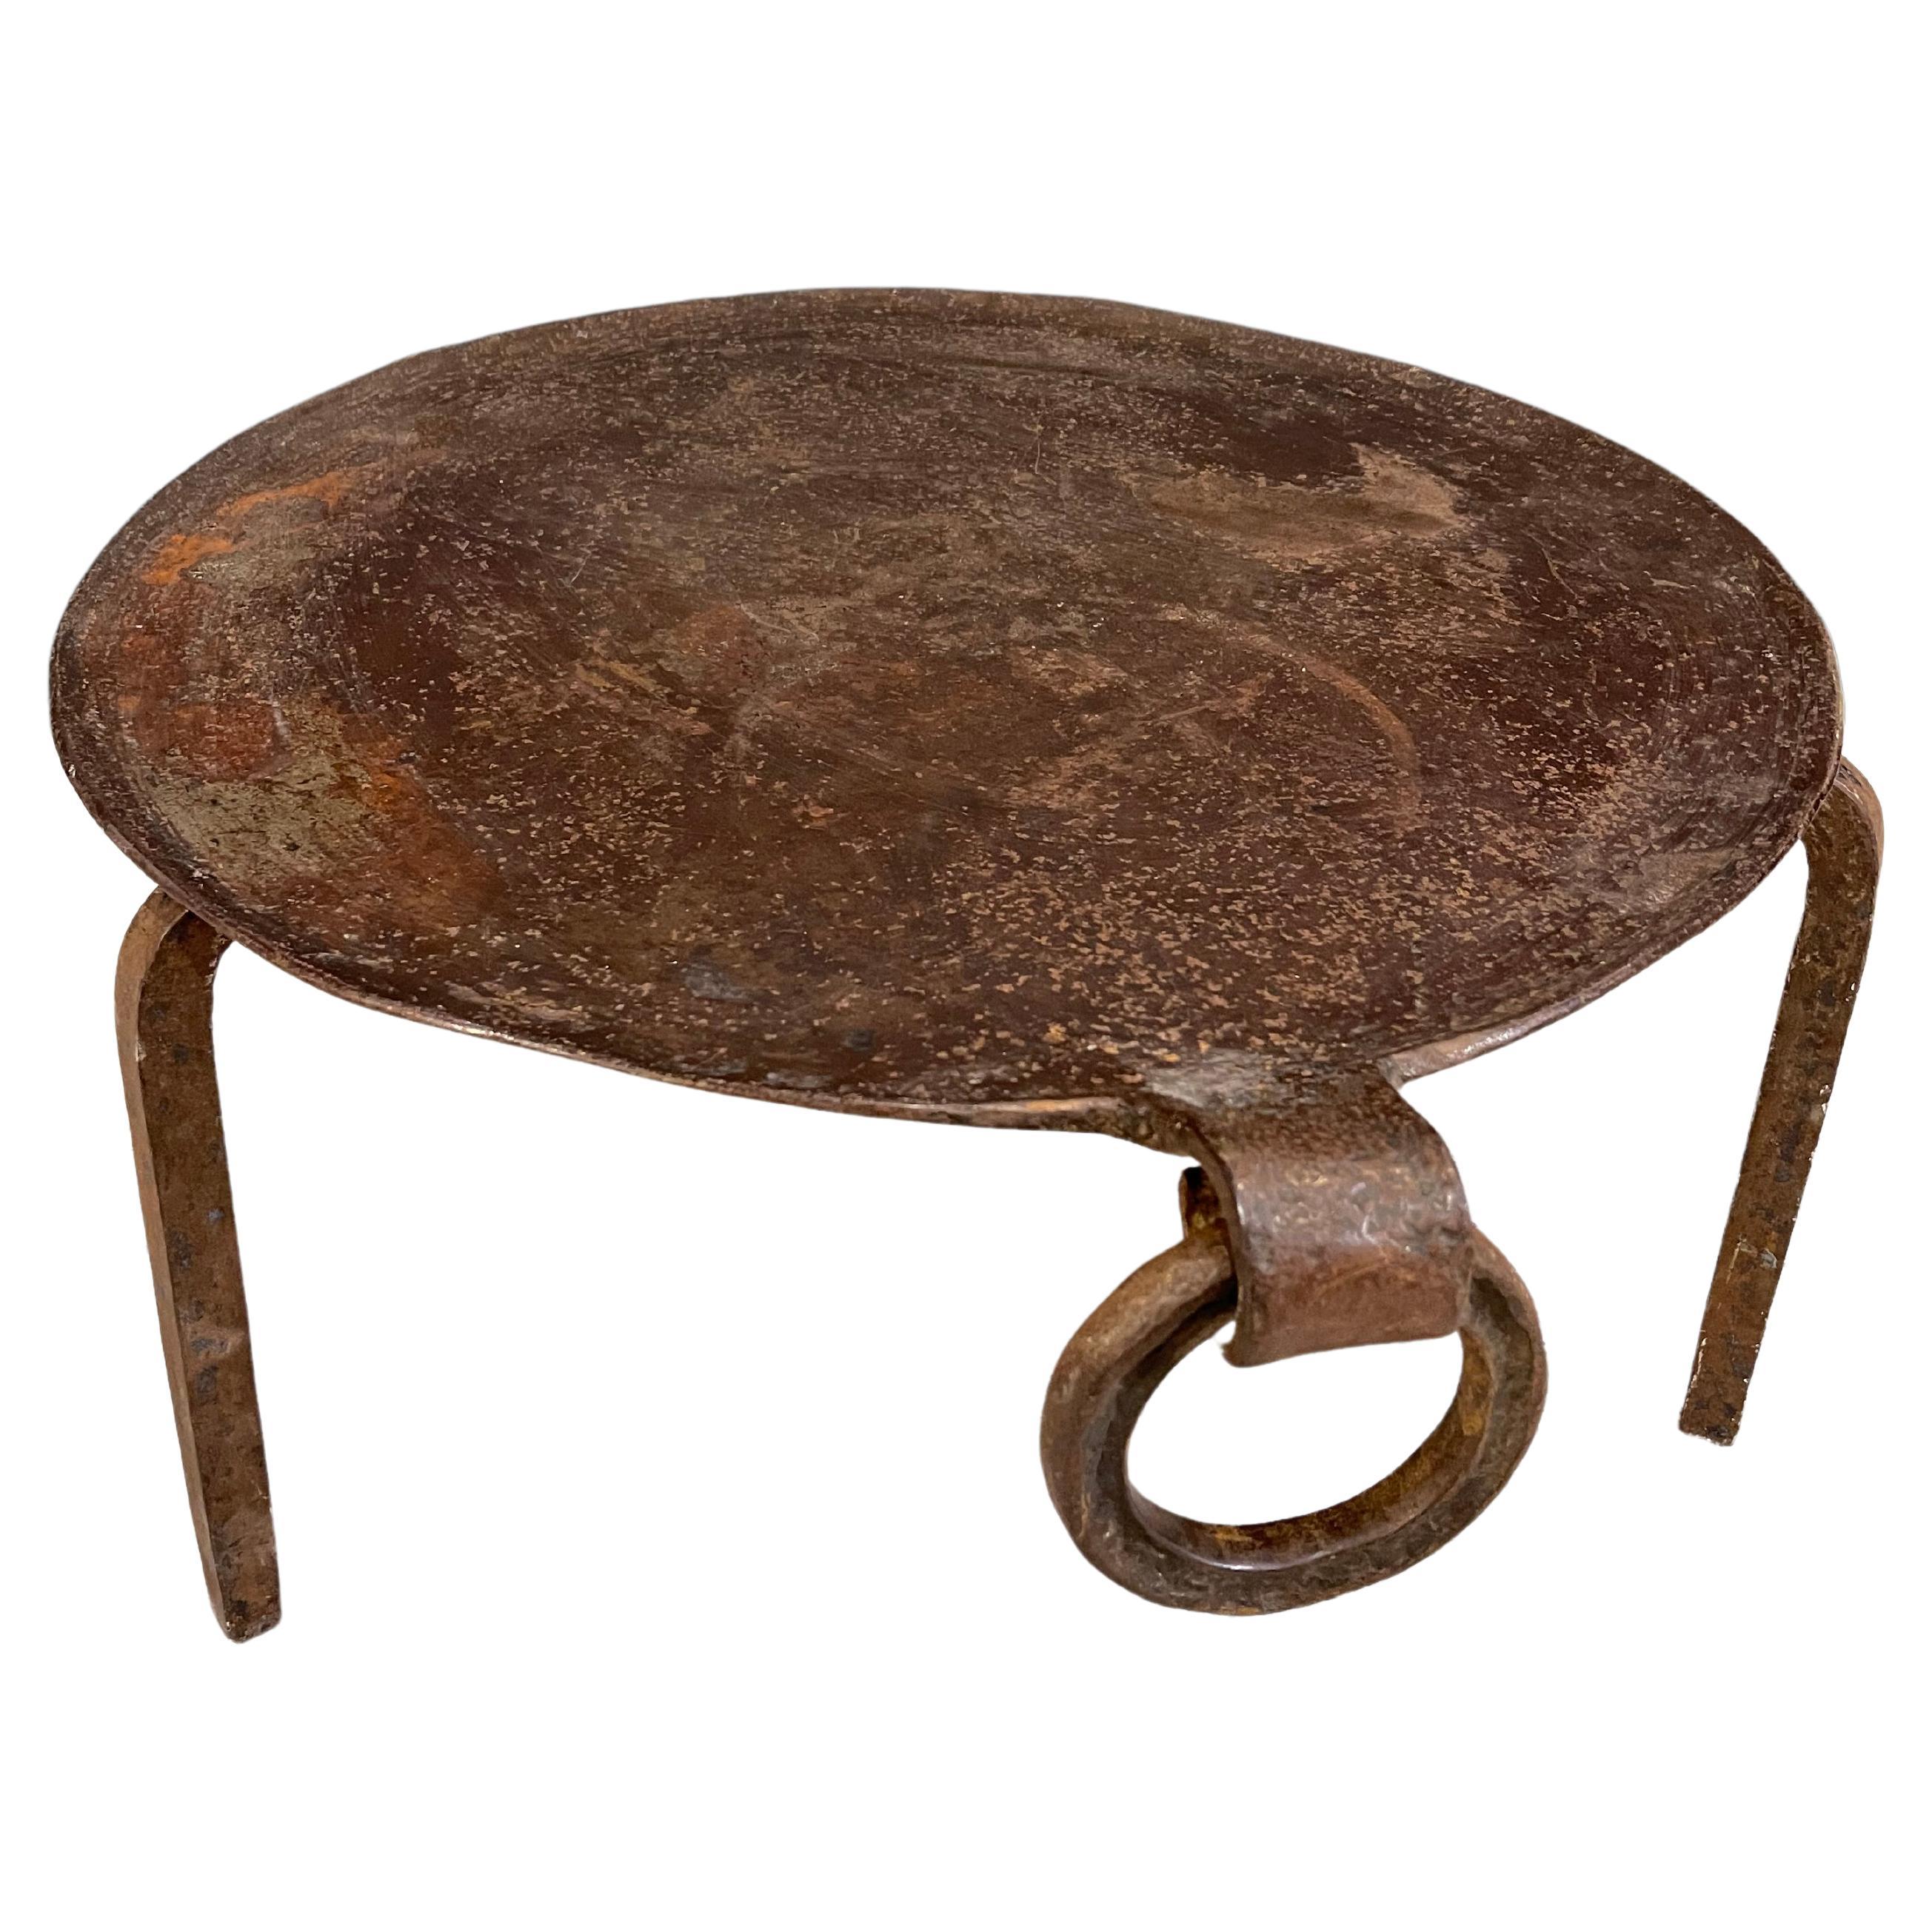 Iron table composed of a circular iron top with the edge curved inwards and a ring that gives all the style of this table. Tray placed on iron tripod foot.